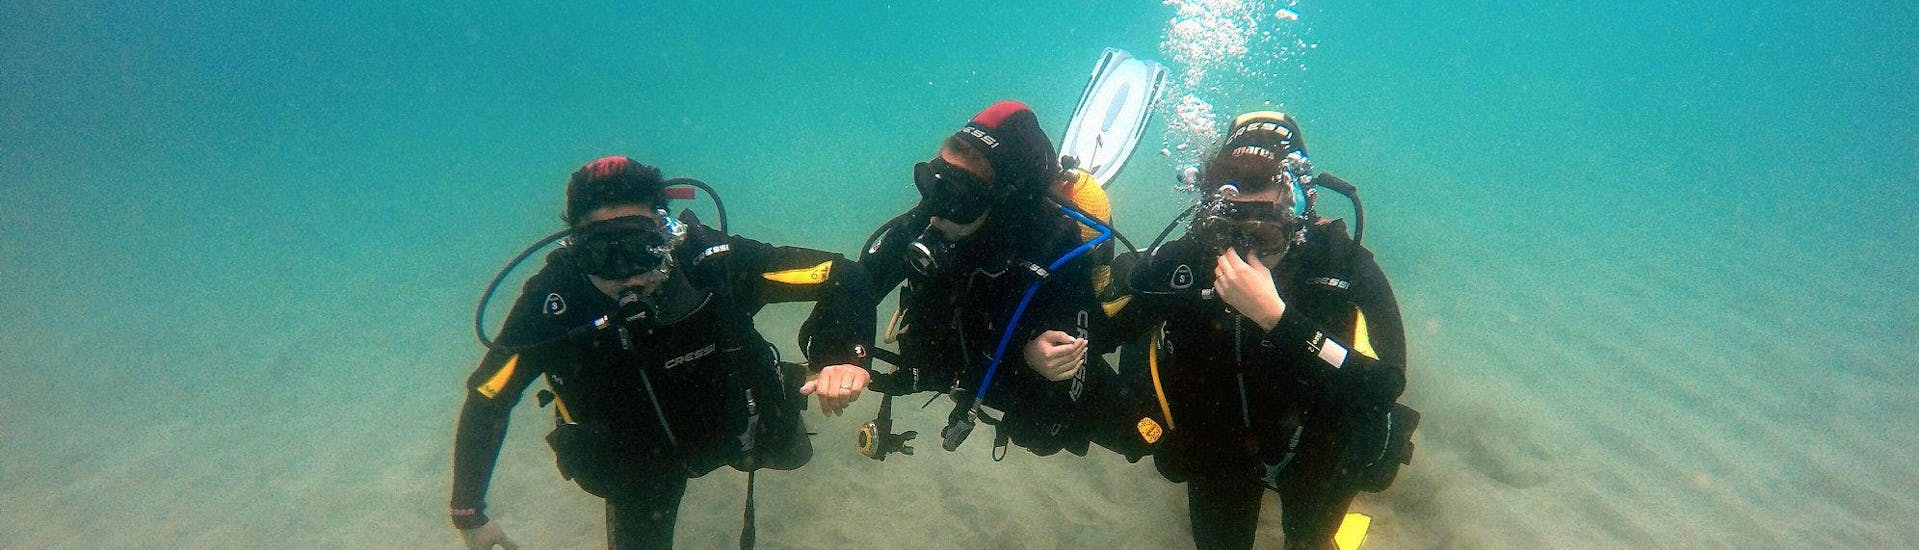 Open Water Diver Course for Beginners in Costa Calma.